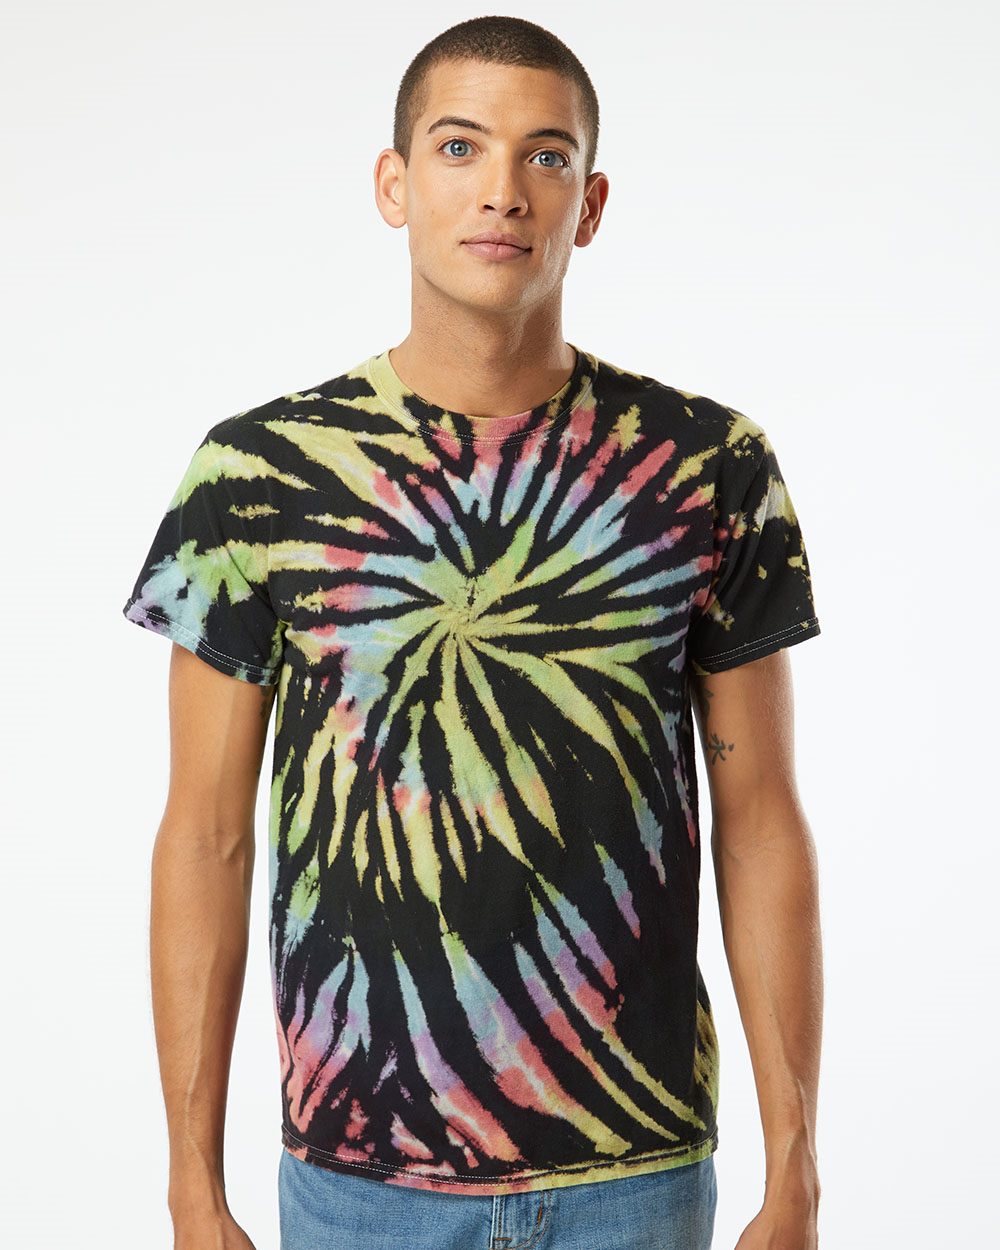 Dyenomite 200MS Multi-Color Spiral Short Sleeve T-Shirt - Dayglo - M